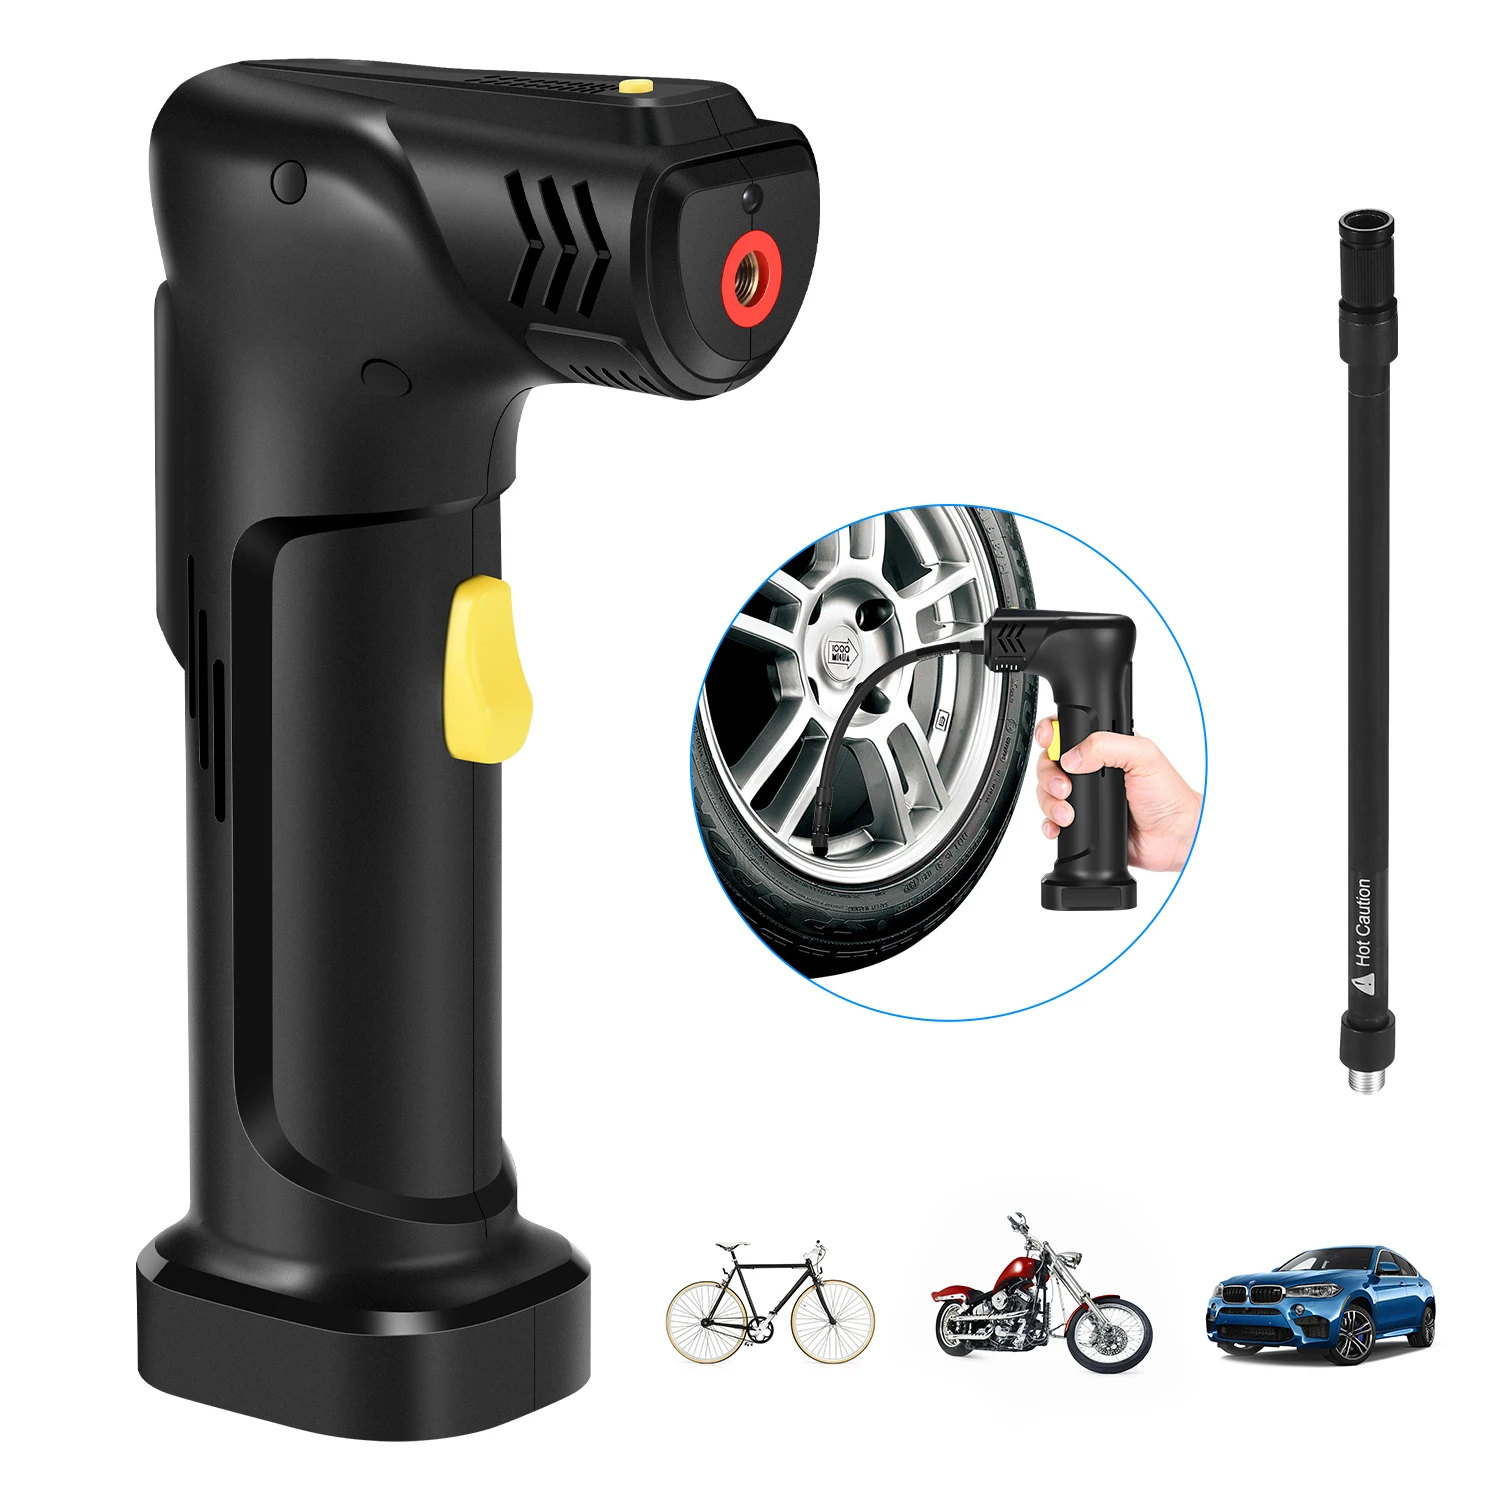 Cordless Tire Inflator ,120PSI Portable Battery Rechargeable Tire Air Compressor for Bike Car ,Toy Ball Football